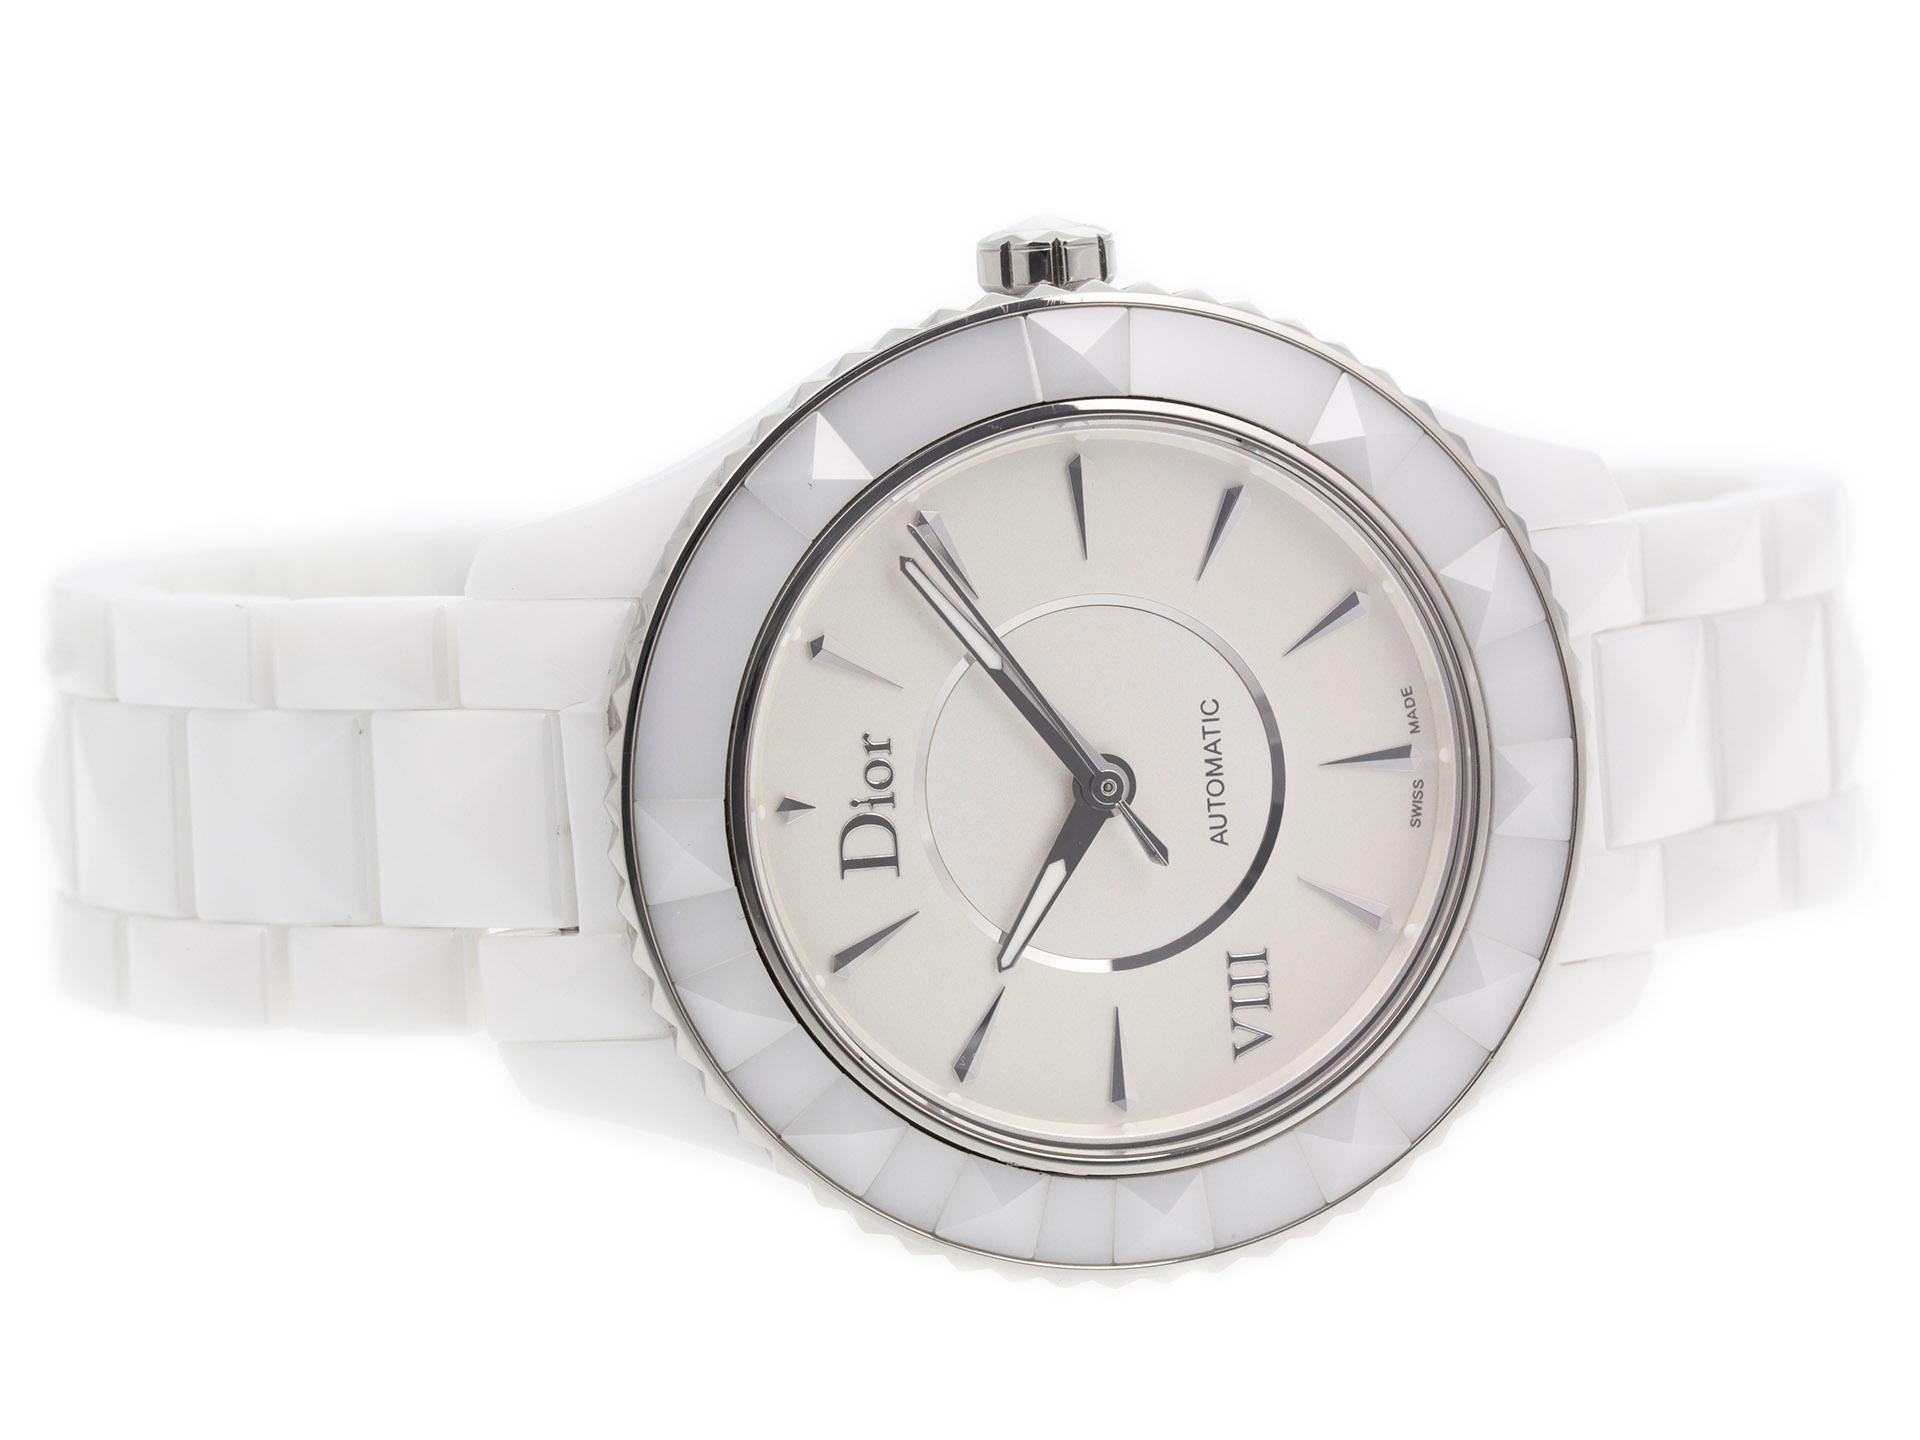 Ceramic & steel Christian Dior VIII automatic watch with a 38mm case, white dial, and bracelet with folding clasp. Features include hours, minutes, and seconds. Comes with a Gift Box and 2 Year Store Warranty.​

Brand	Christian